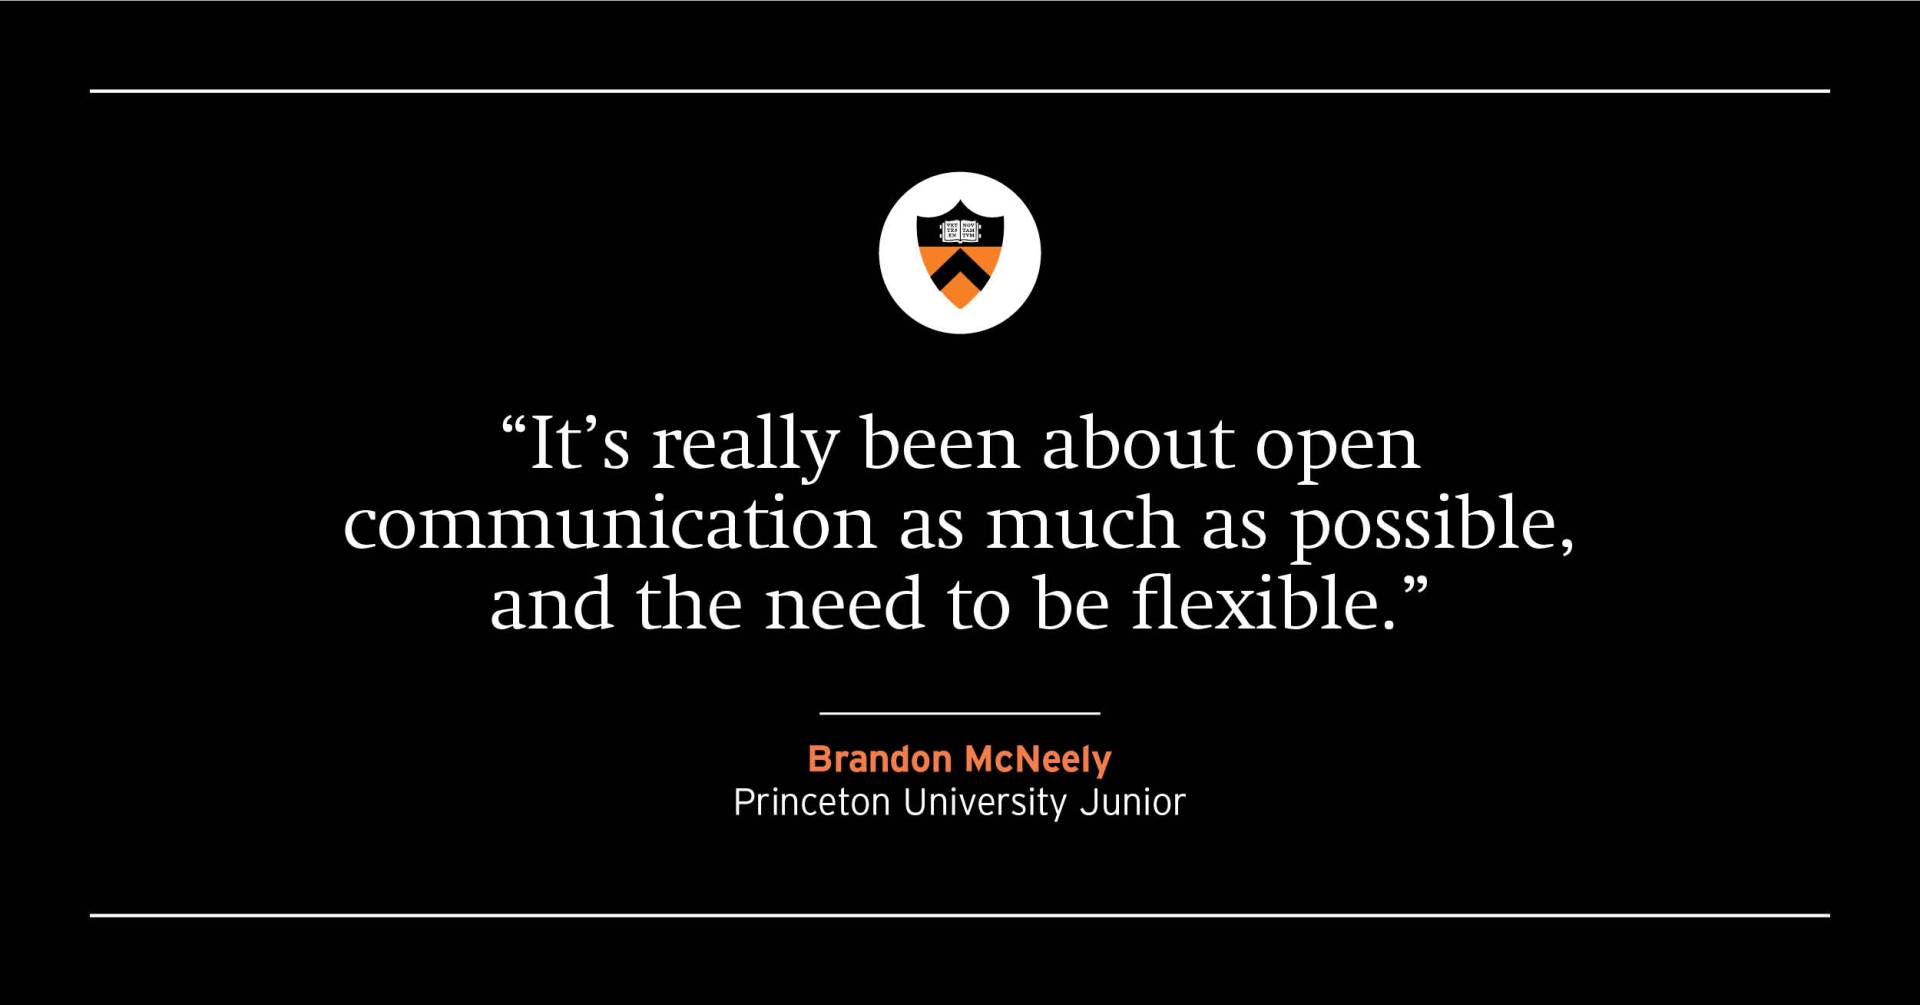 “It’s really been about open communication as much as possible, and the need to be flexible.” Brandon McNeely, Princeton University junior